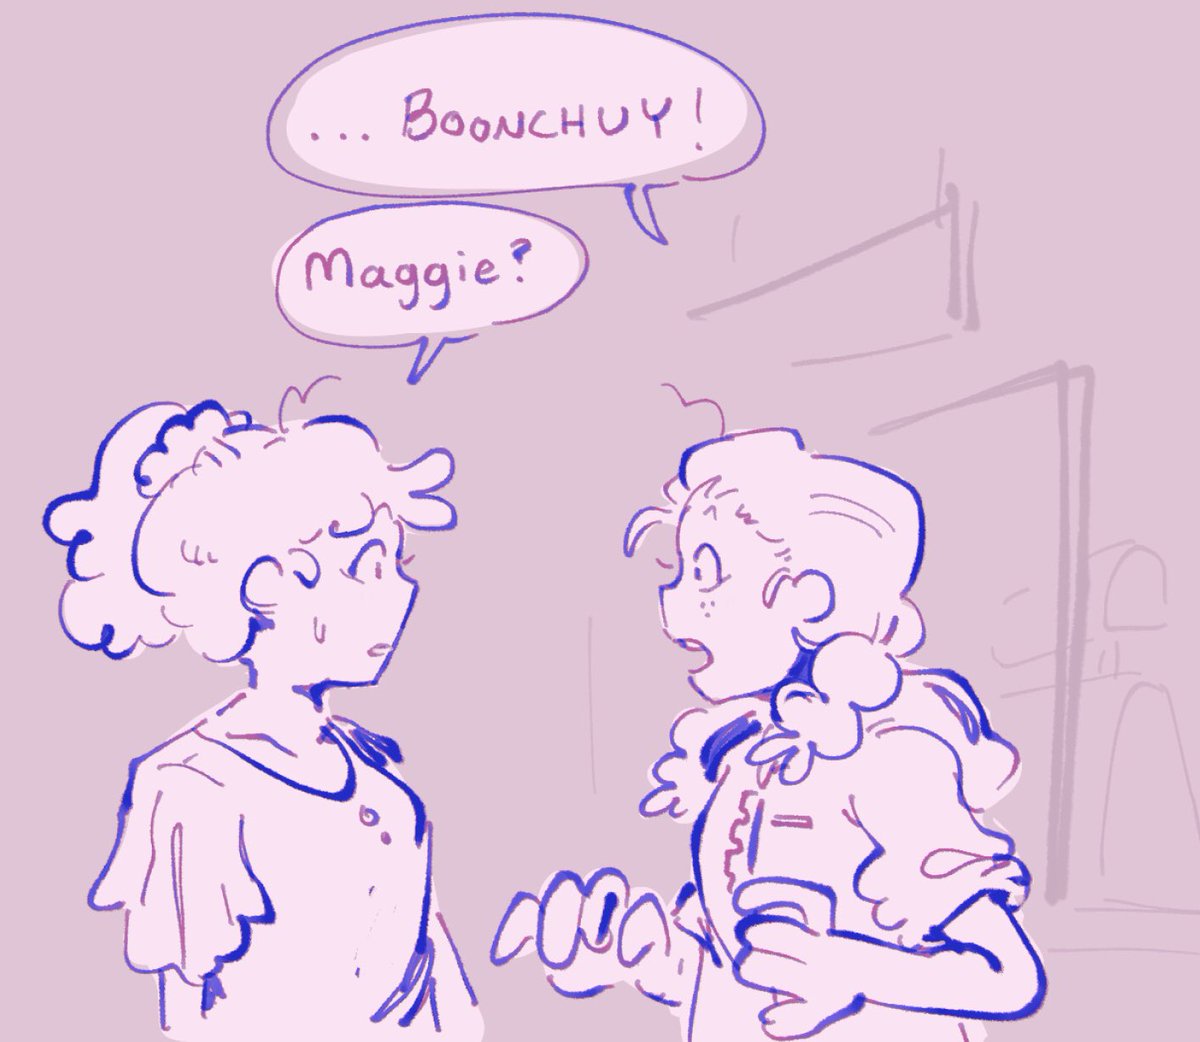 anne and maggie comic abt being cringe 
-
1/2 